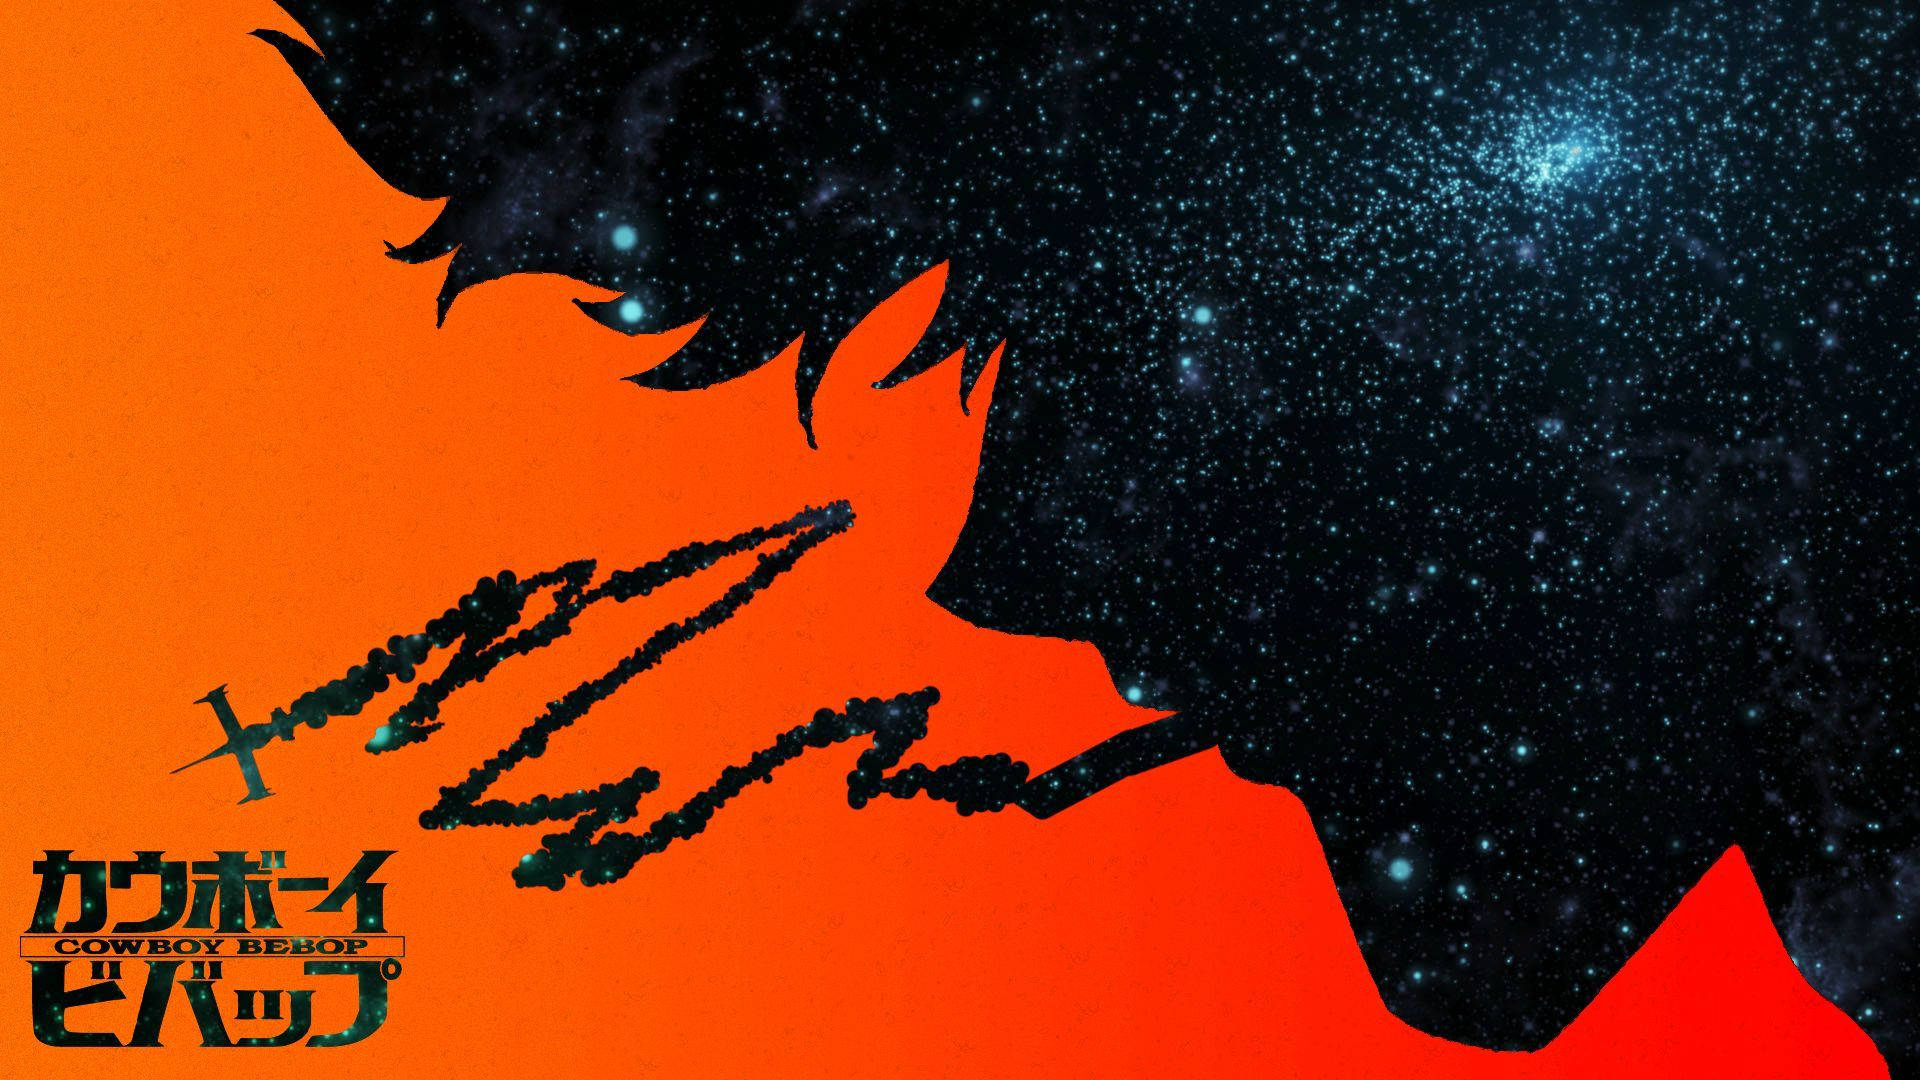 Wiping Out Your Worries with Cowboy Bebop Wallpaper